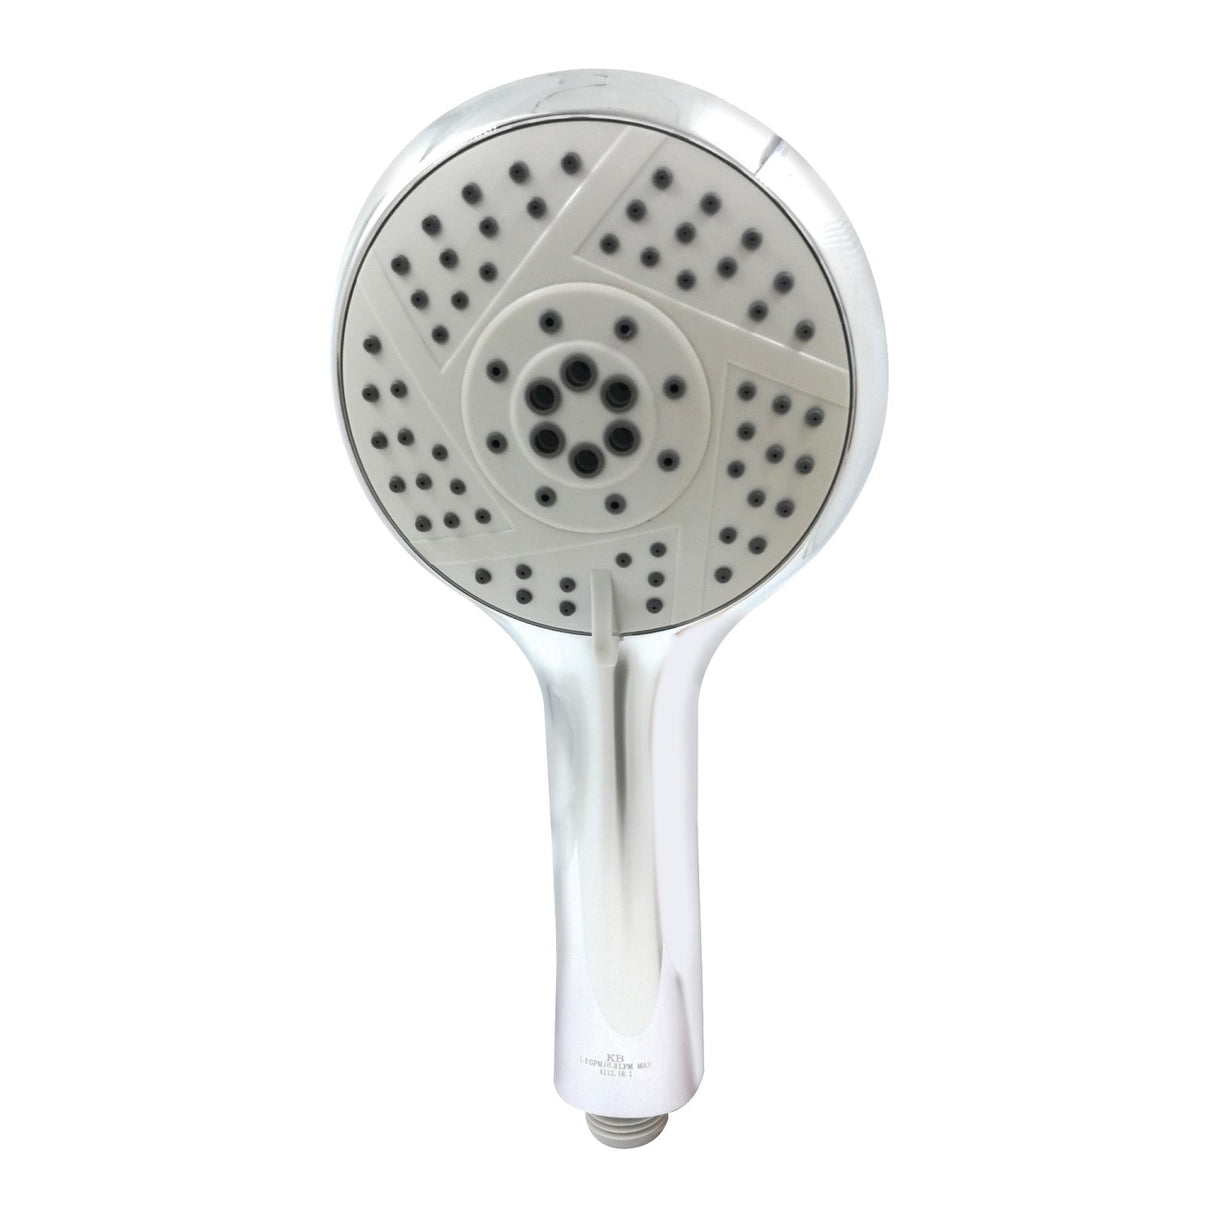 Vilbosch KXH144A1 5-Function Hand Shower, Polished Chrome